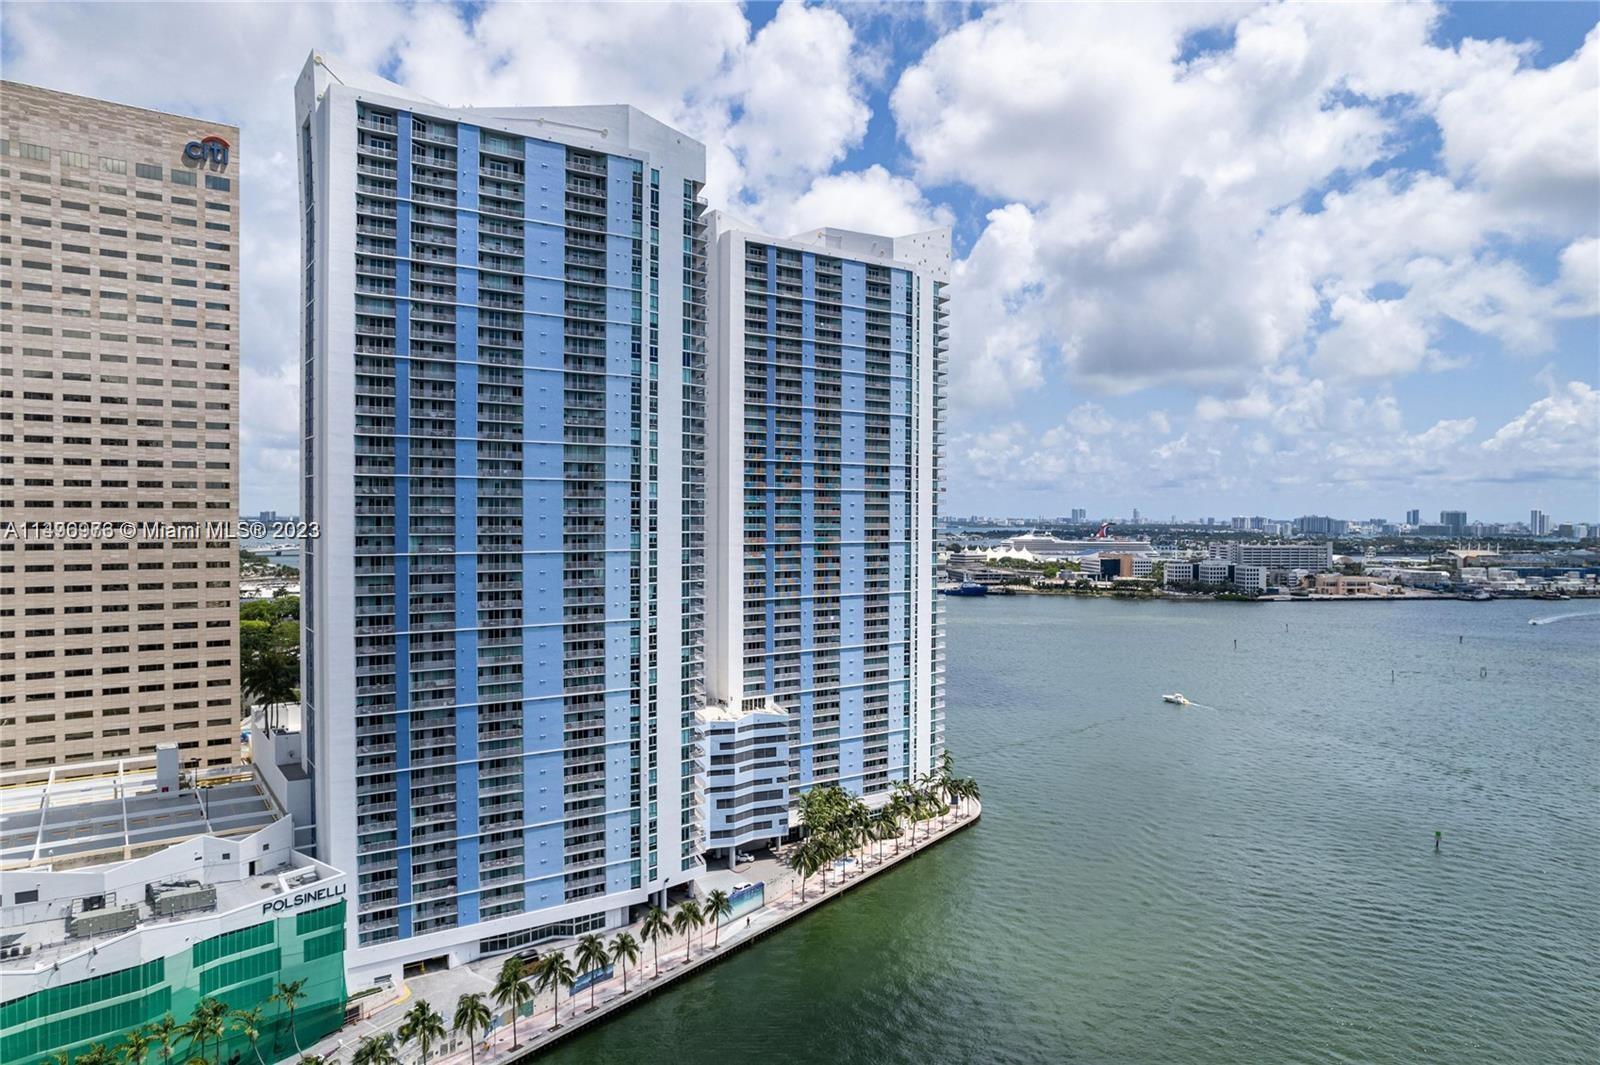 Unit with wood floors, European kitchen, granite counters, S/S appliances, washer/dryer, and freshly painted. Beautiful views of the bay, bayfront park, and bridges from the 22nd Flr. Direct access from the Miami Riverwalk Promenade to Bayside Marketplace. Building amenities are two pools, a jacuzzi, 2 gyms, 2 party rooms, a sauna, a kid's room, a business center, and EV charging. Enjoy the finest restaurants, entertainment, and shopping while living in the best location downtown.